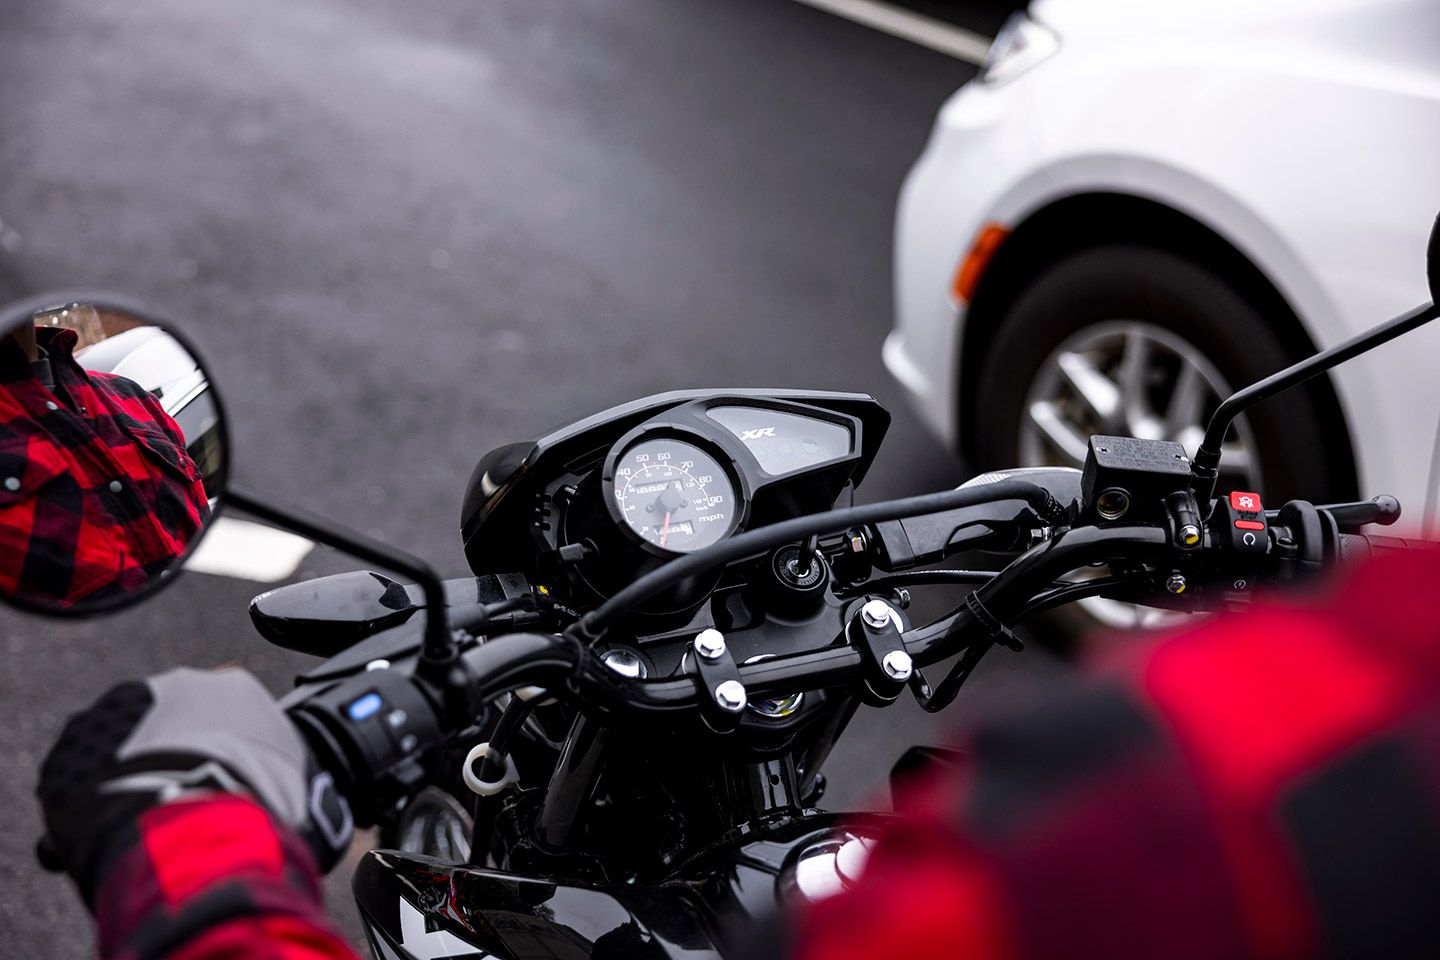 The XR150L is equipped with a simple instrument cluster that is reminiscent of the dashes of old with a scrolling odometer and needle speedometer. No TFT and digital bar-graph speedo here.